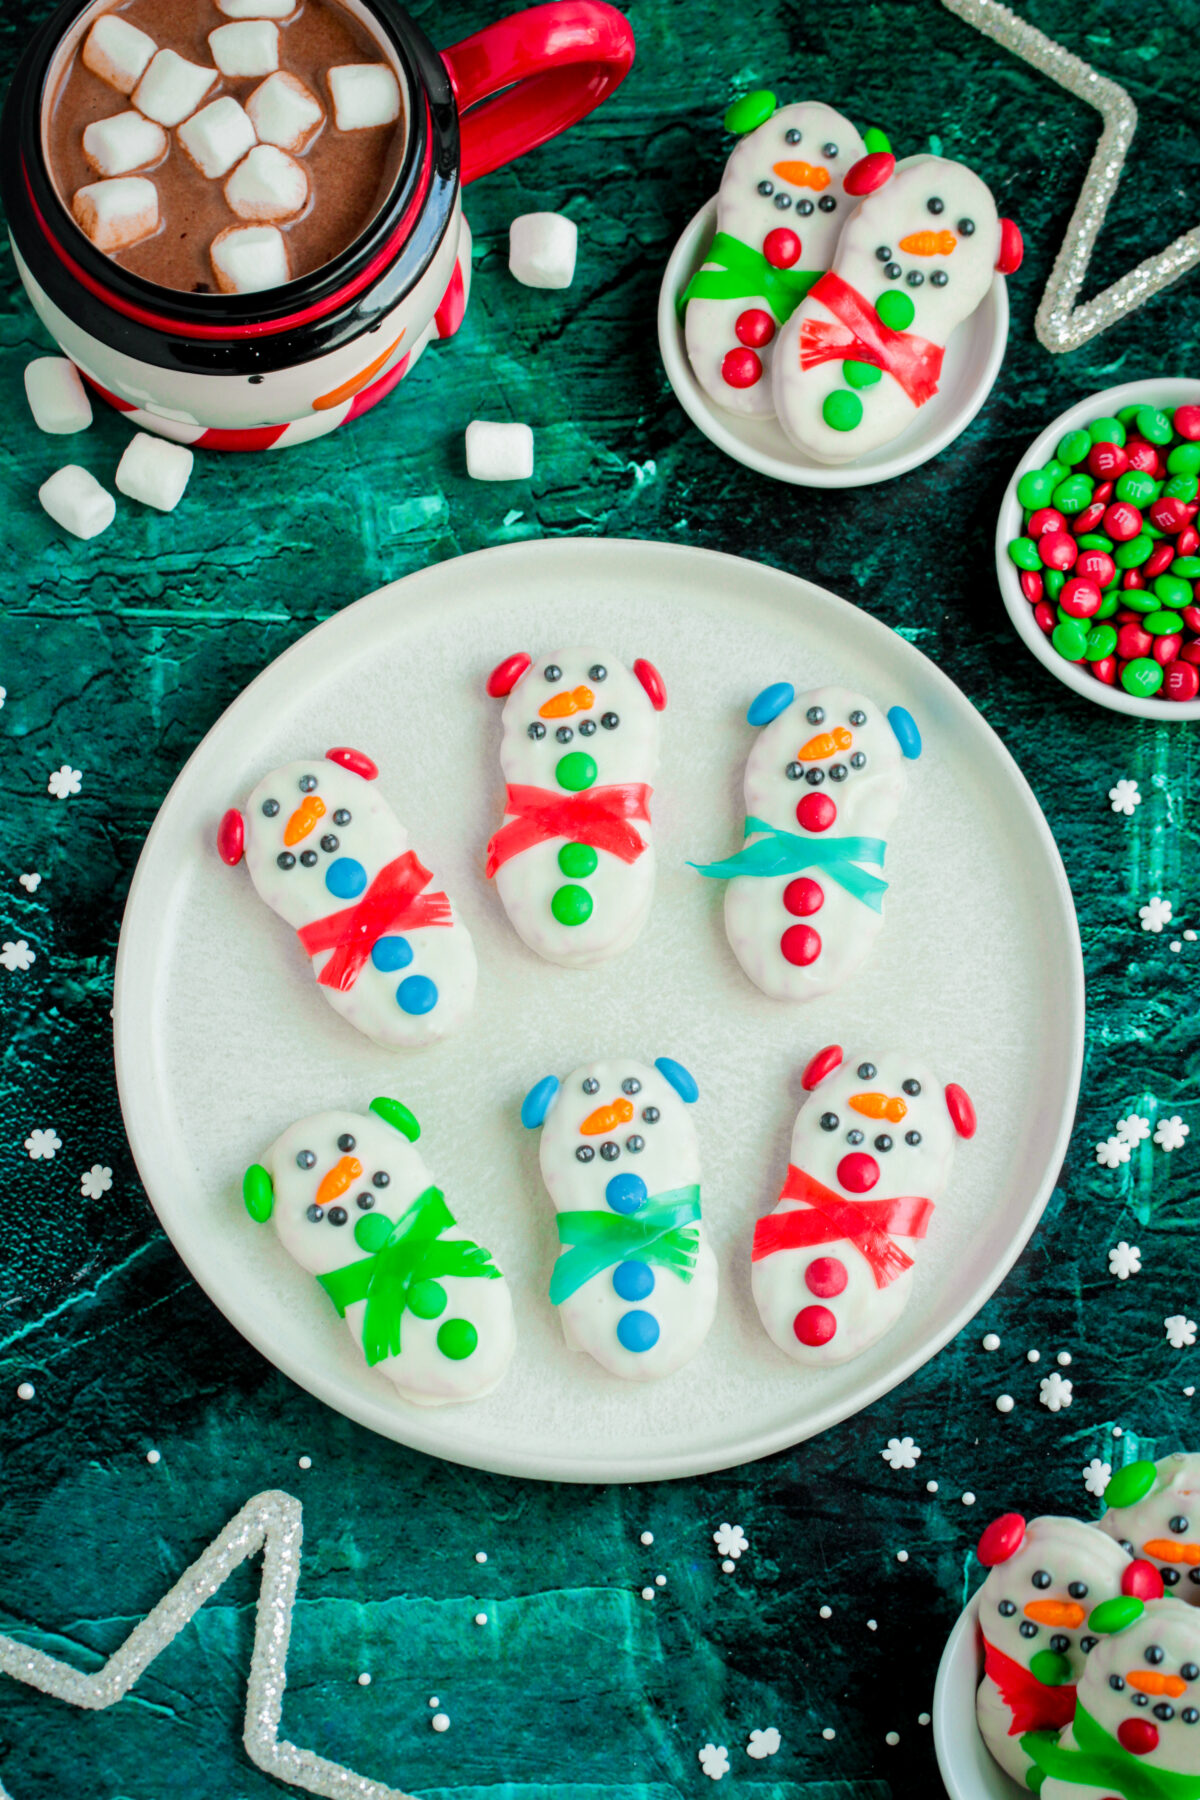 Get into the holiday spirit with these festive Nutter Butter snowmen! Follow our easy recipe for snowmen that are as cute as a button.